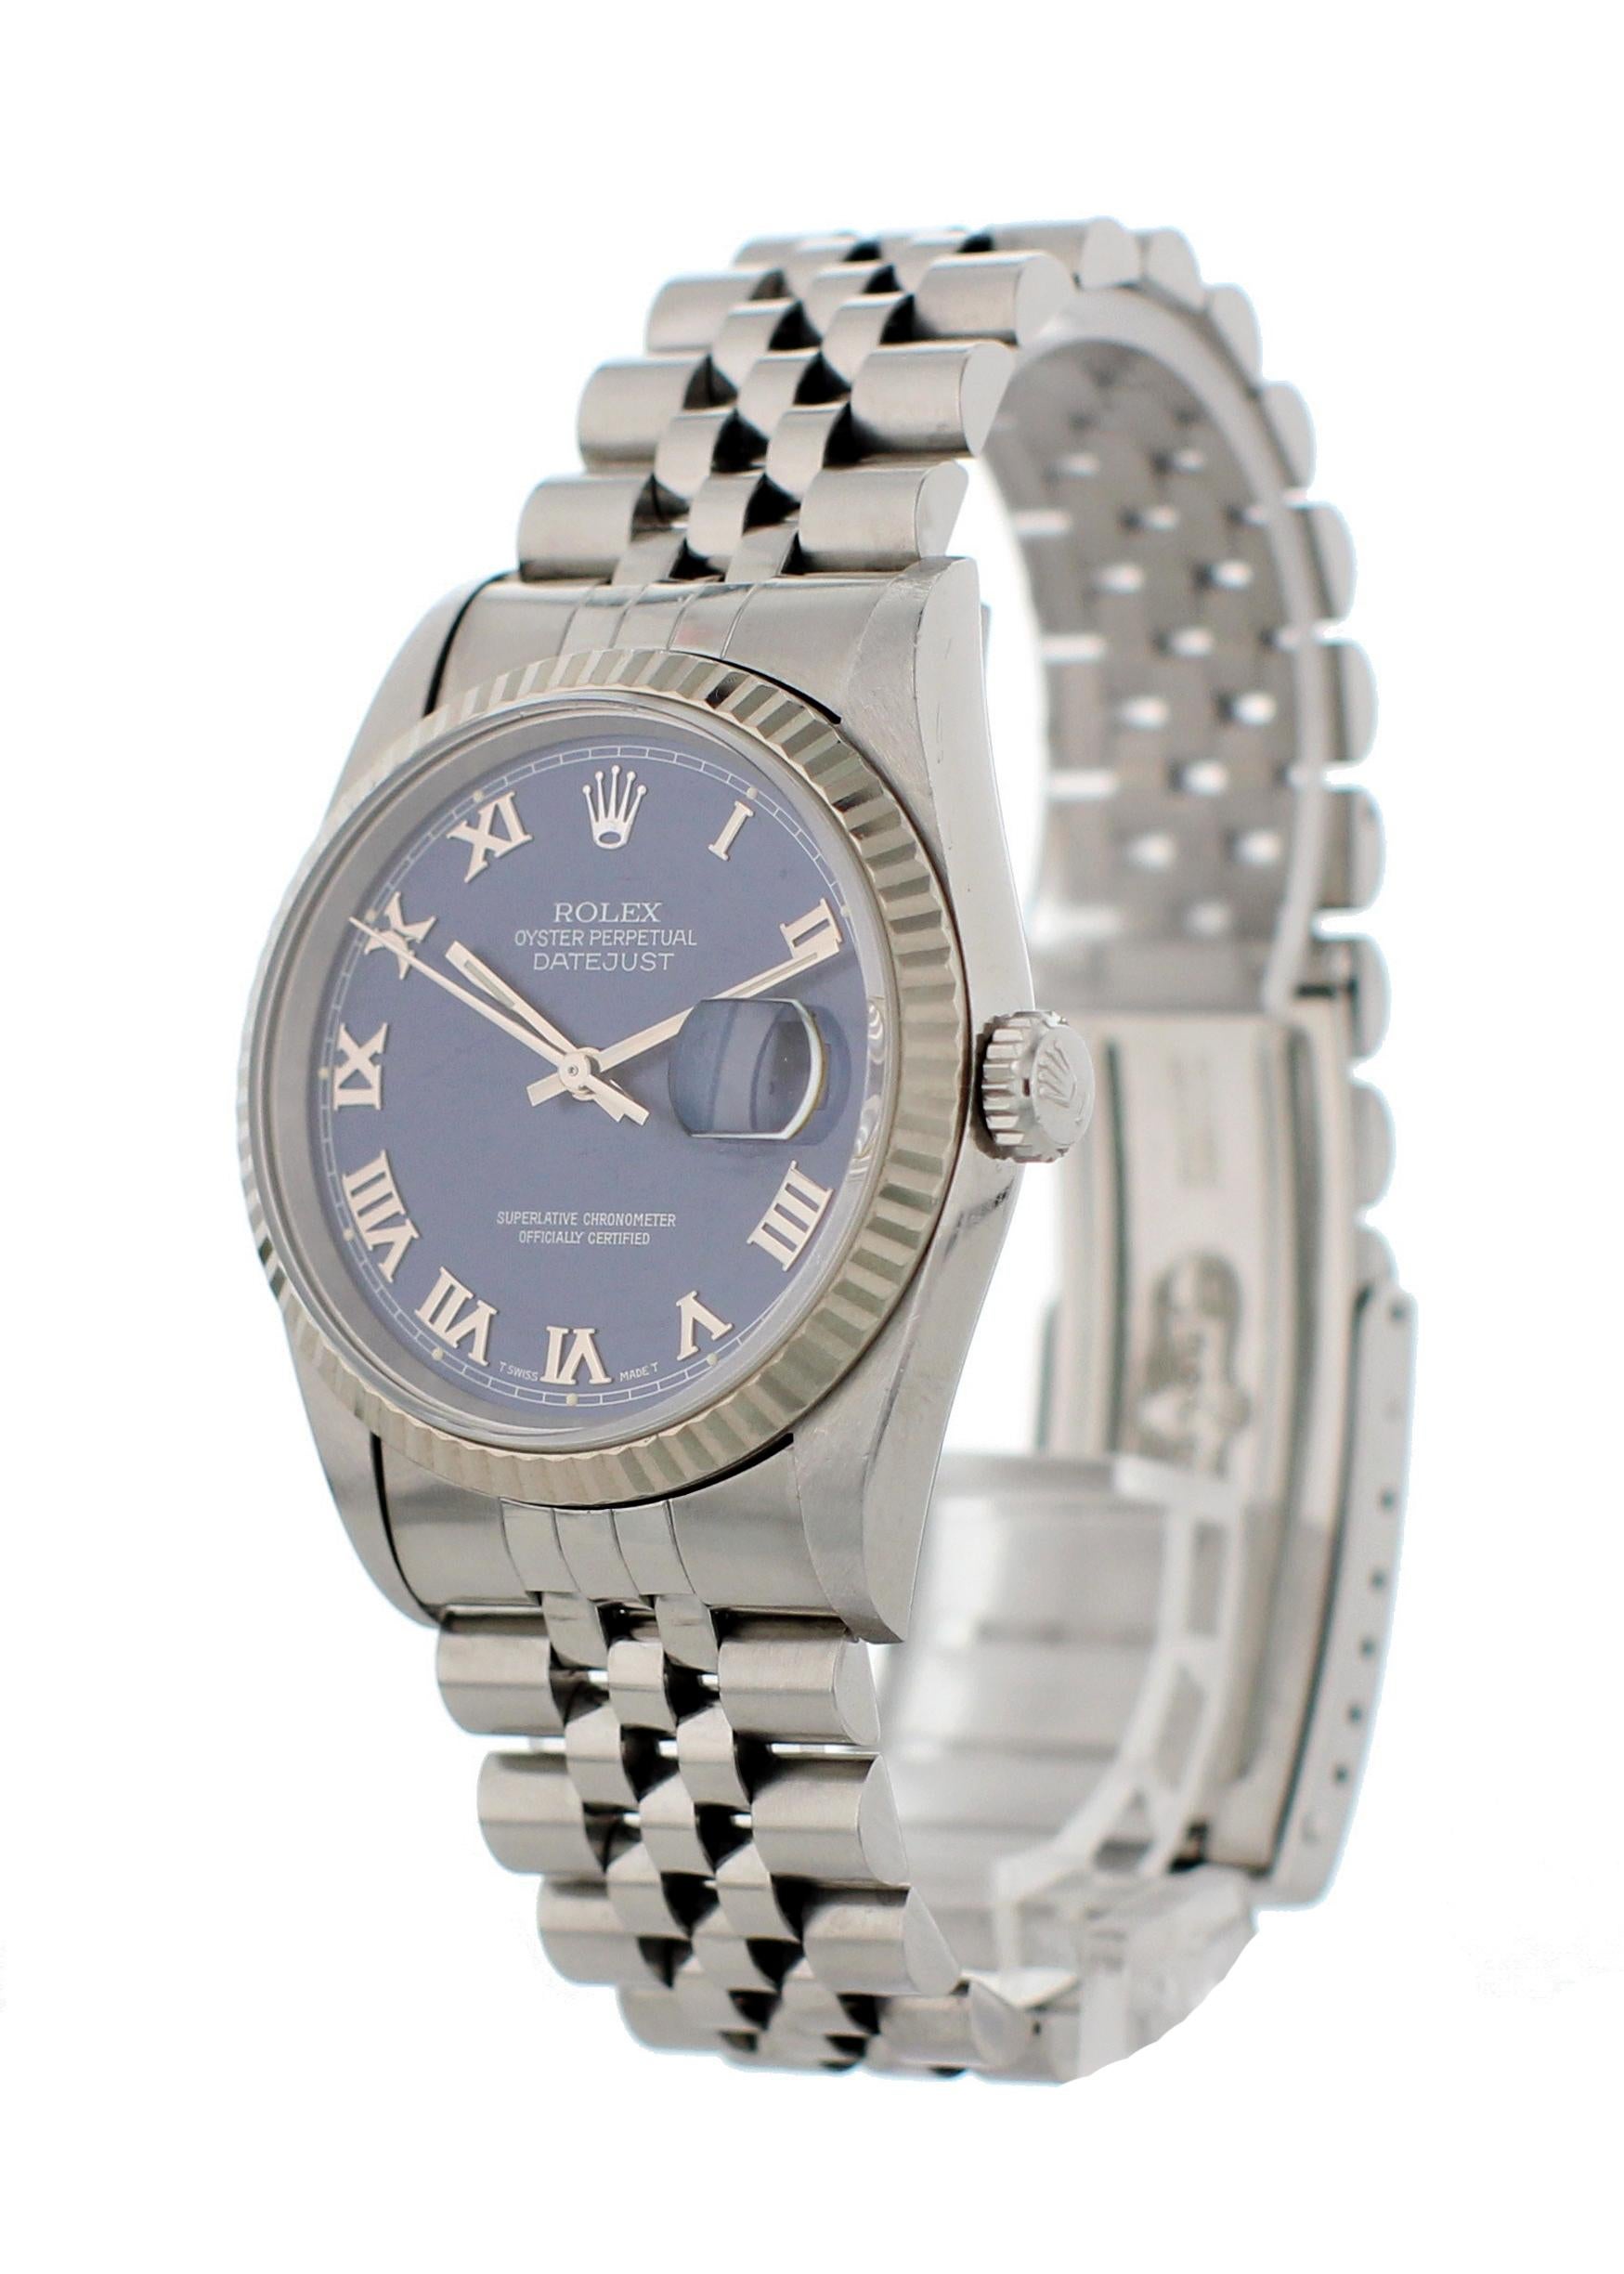 Rolex Oyster Perpetual Datejust 16234 Mens Watch. 36 mm stainless steel case. 18k white gold Fluted bezel. Blue dial with steel hands and index markers. Quickset date display by the 3 o'clock position. Stainless steel jubilee band with a fold over